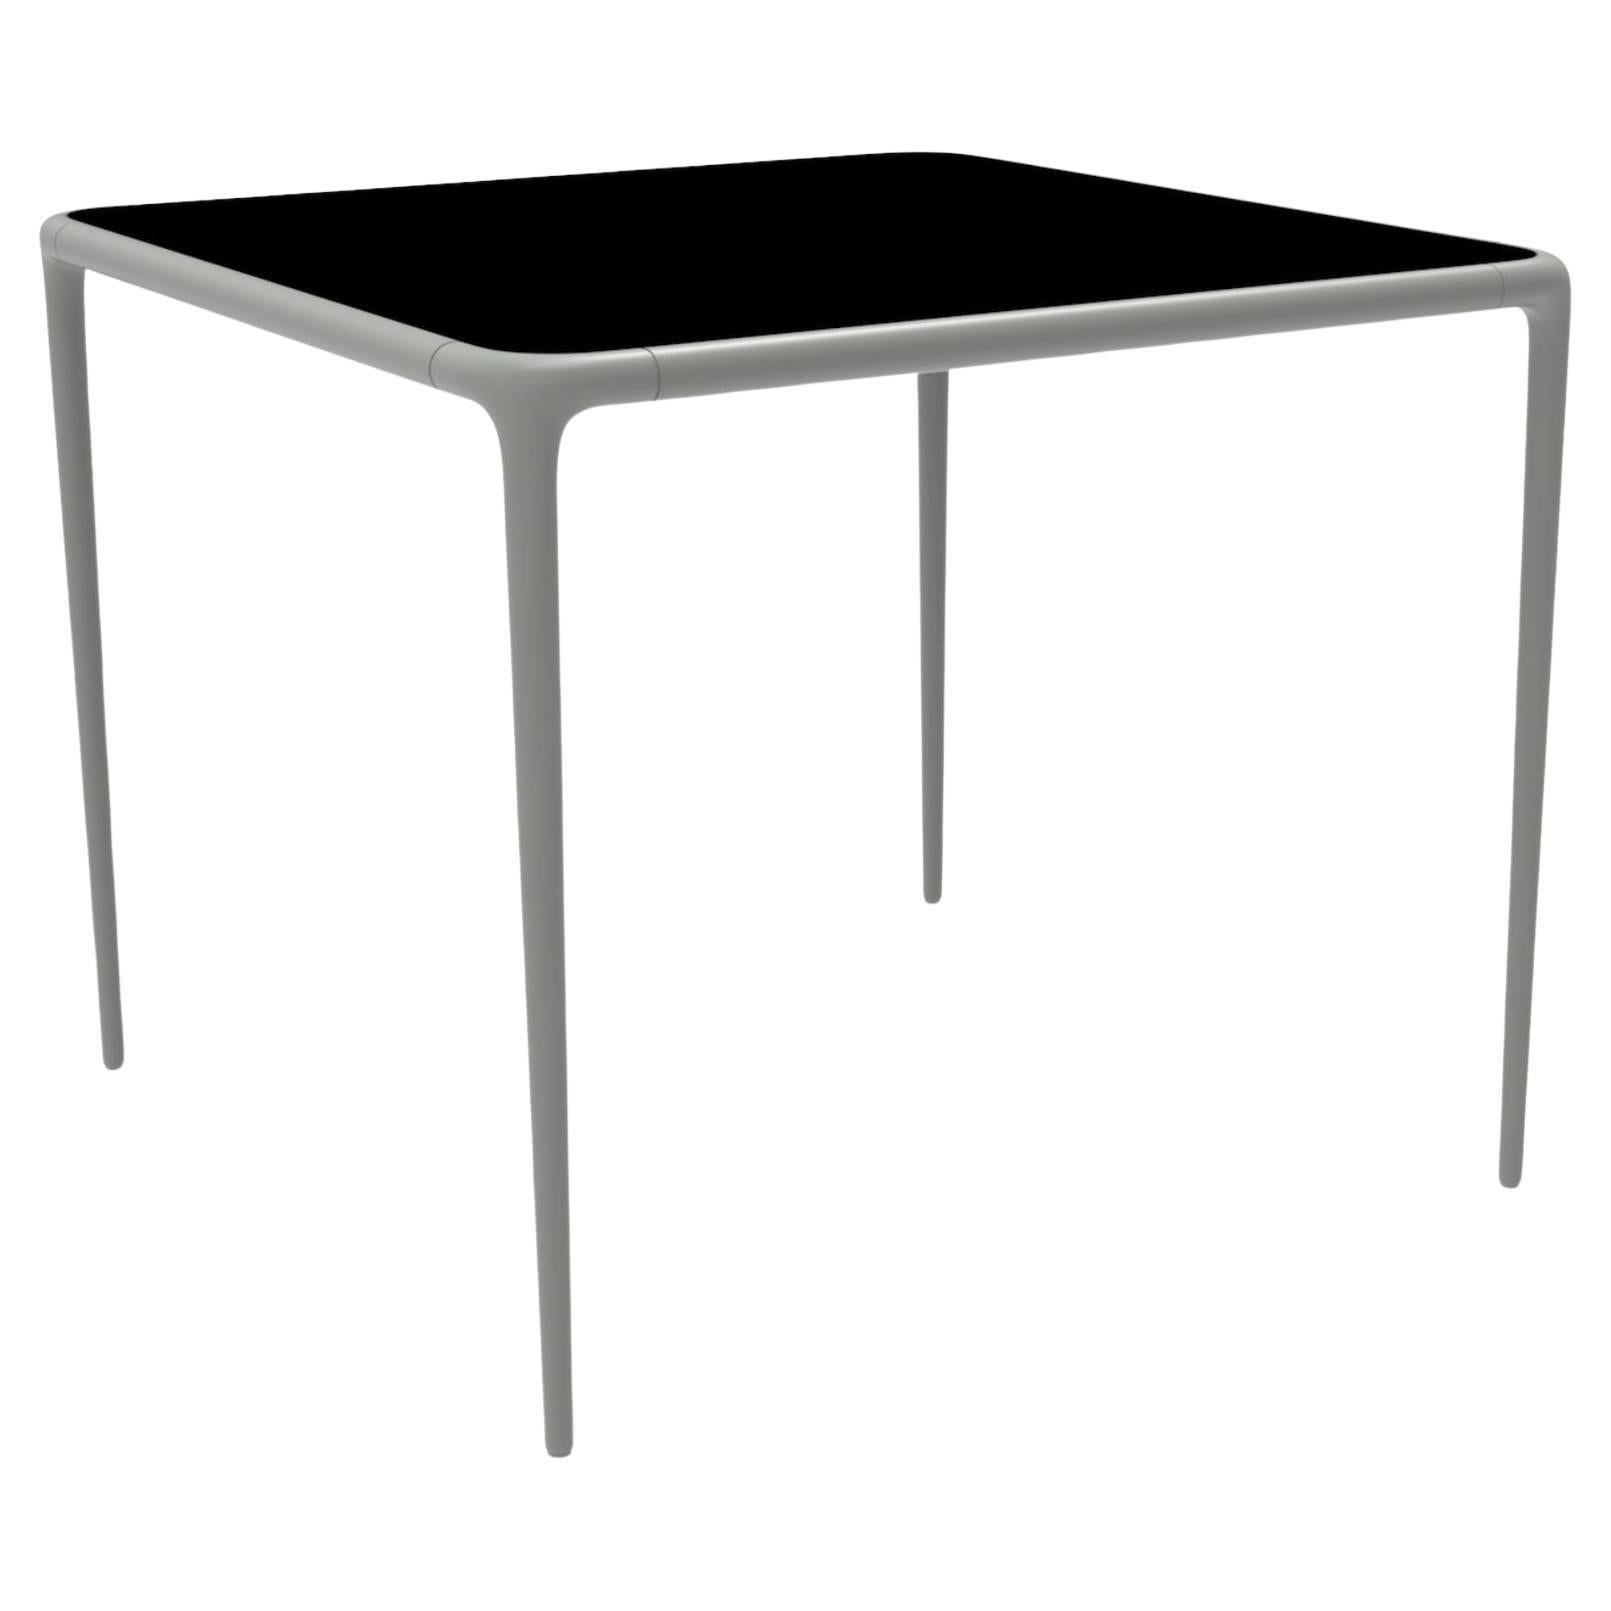 Xaloc Silver Glass Top Table 90 by Mowee For Sale